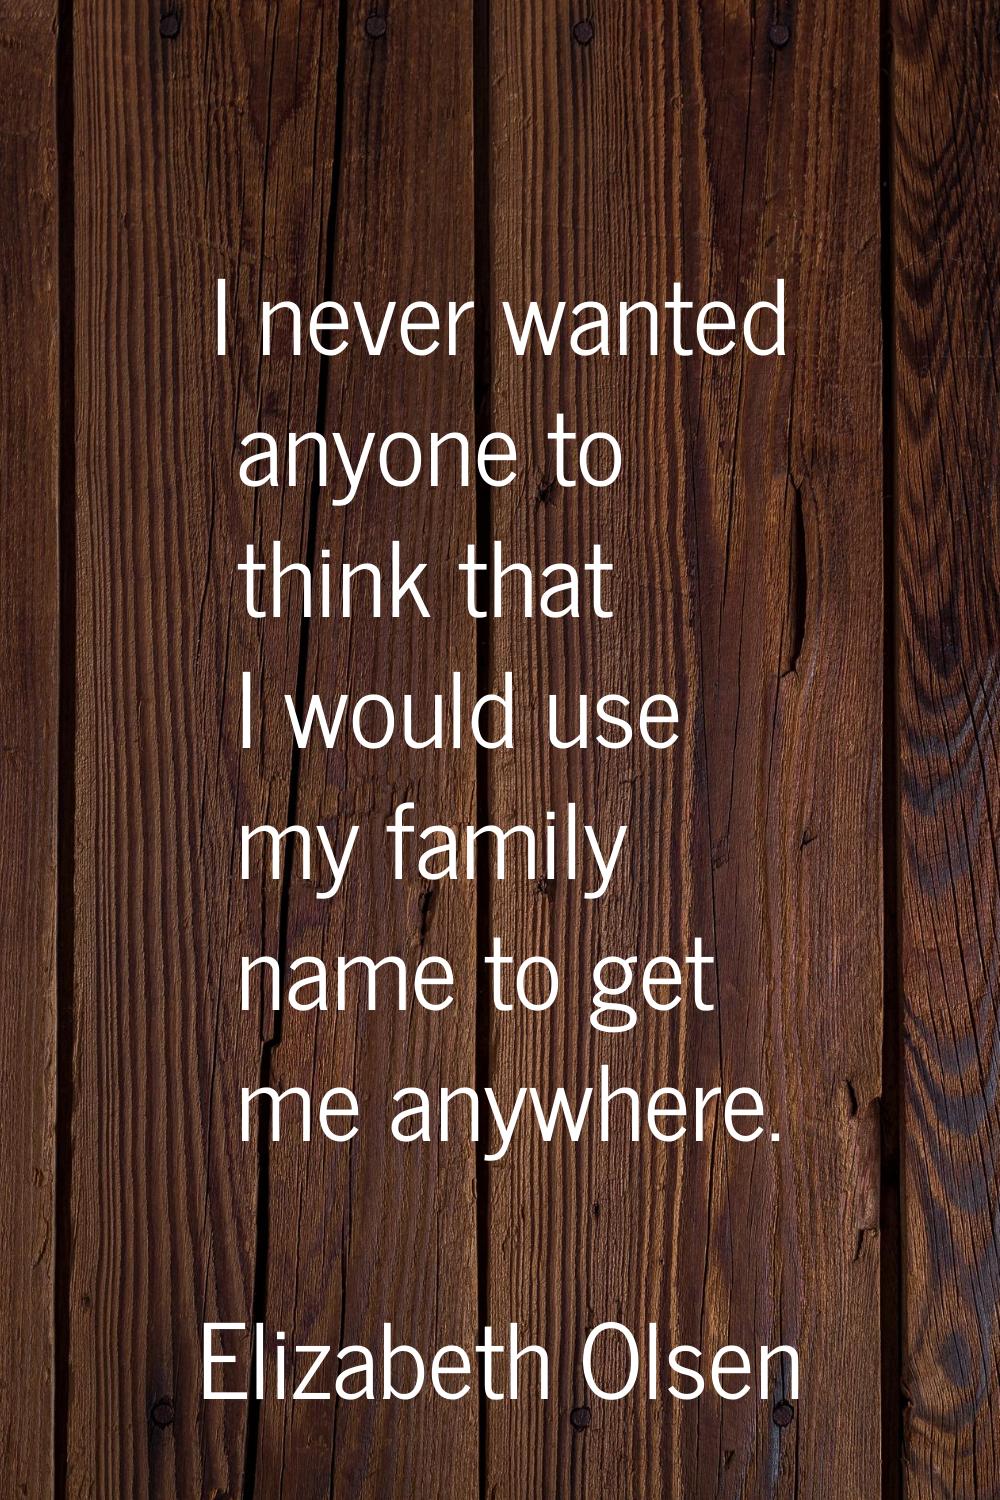 I never wanted anyone to think that I would use my family name to get me anywhere.